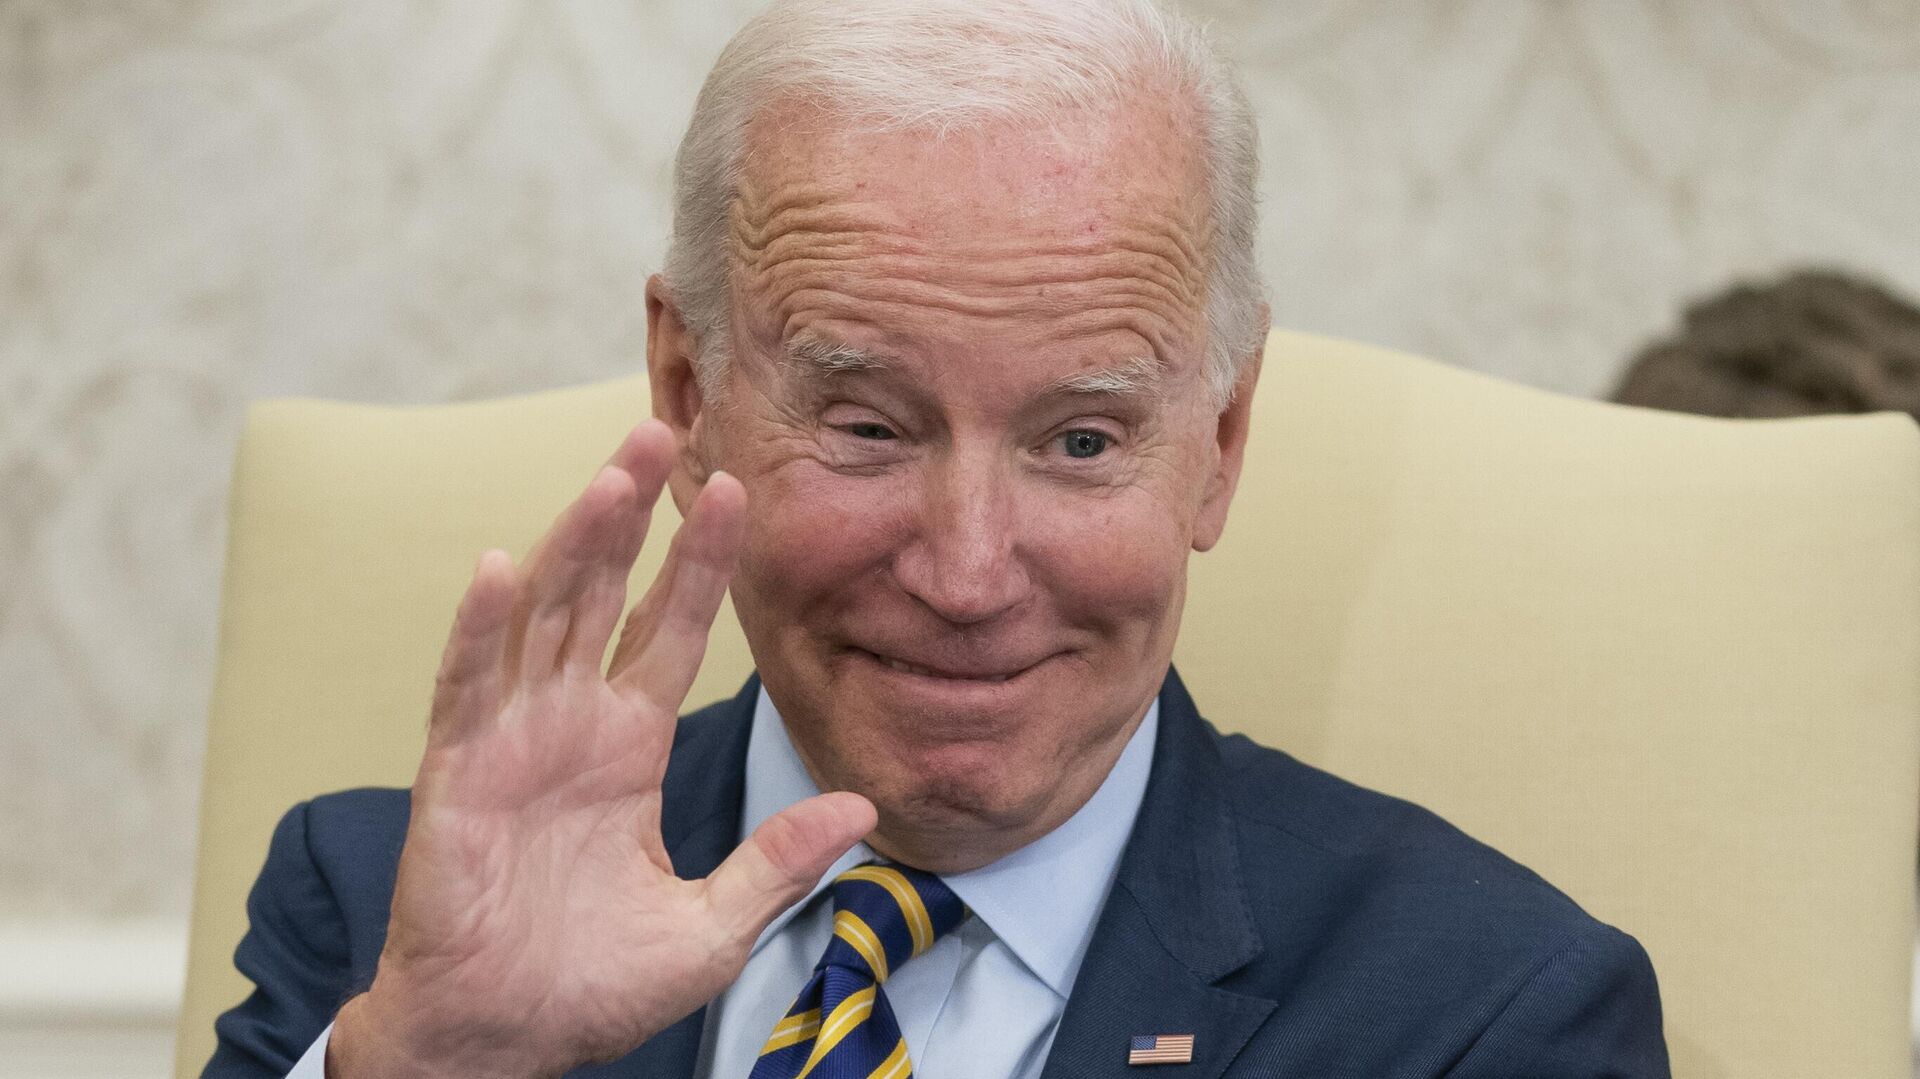 President Joe Biden waves during a meeting with South African President Cyril Ramaphosa in the Oval Office of the White House, Friday, Sept. 16, 2022, in Washington.  - Sputnik International, 1920, 01.04.2023